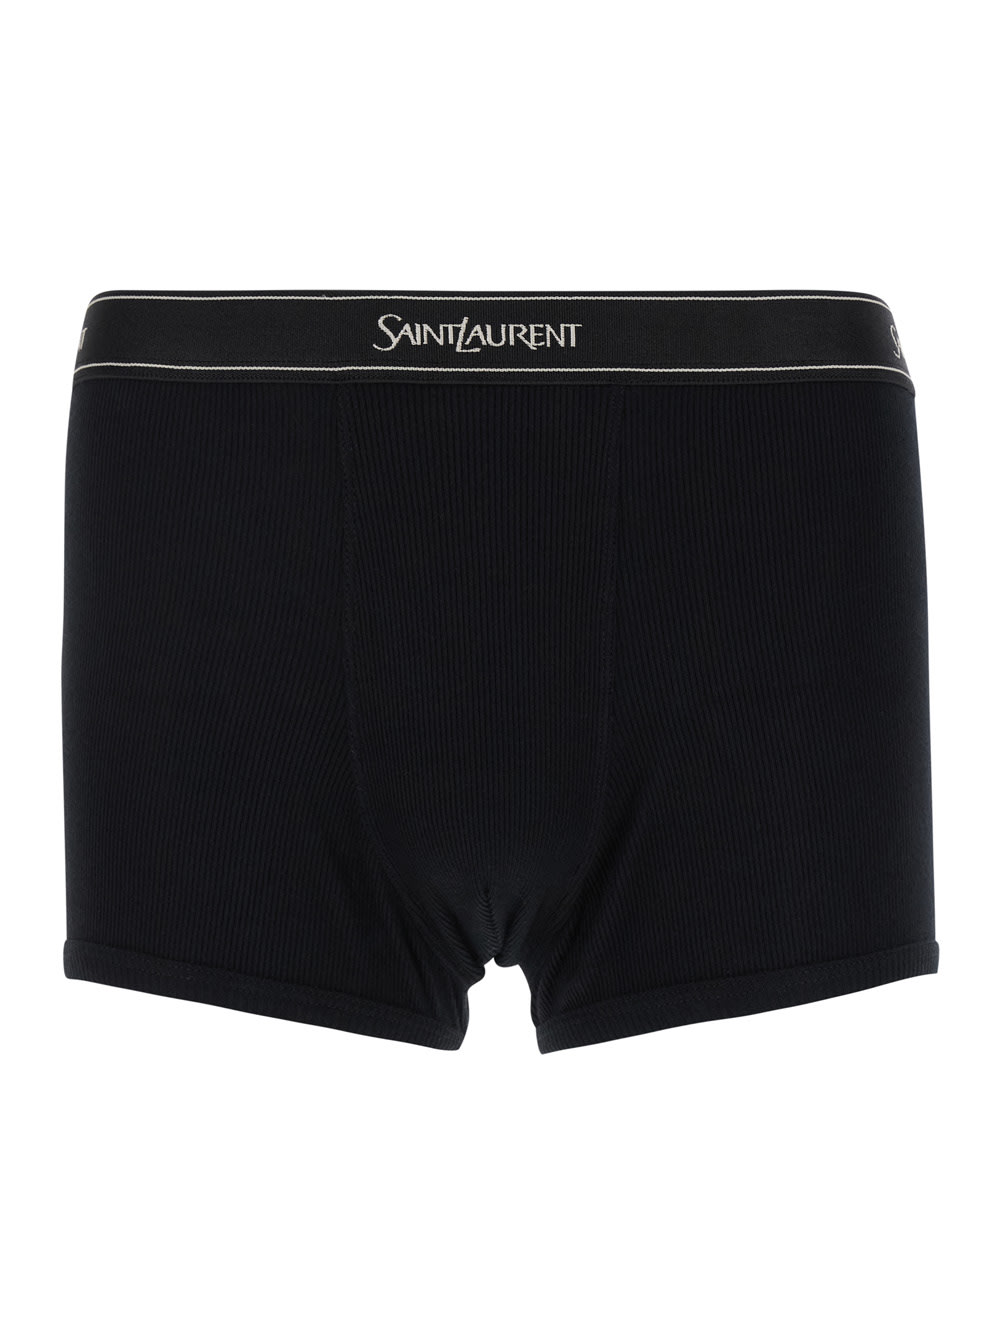 SAINT LAURENT BLACK BOXER BRIEFS WITH LOGO LETTERING EMBROIDERY IN RIBBED COTTON MAN